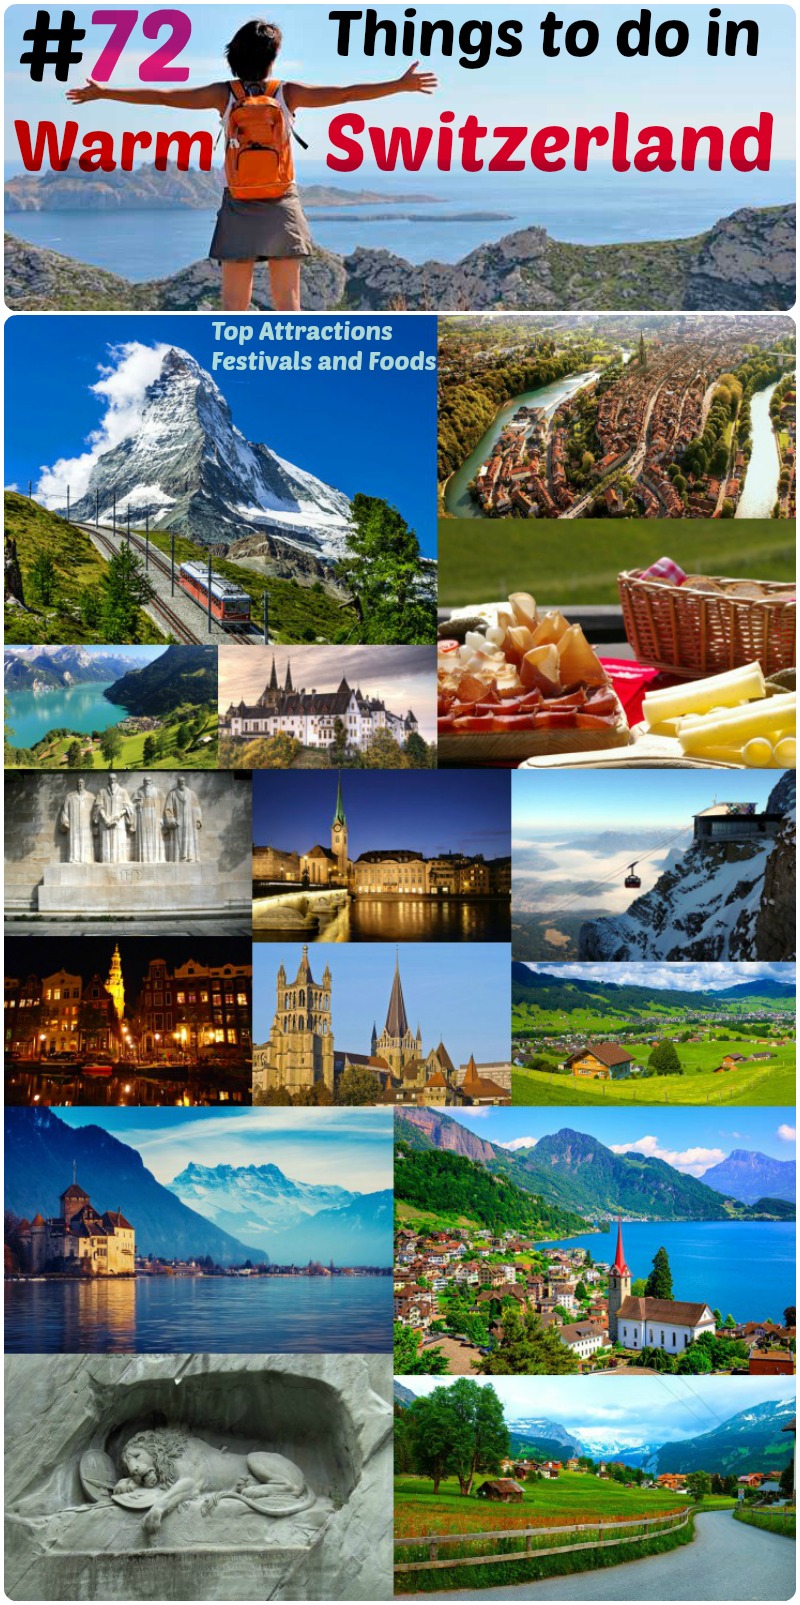 #72 Special Things to do in Switzerland, Attractions, Food, Festival & Cost of living